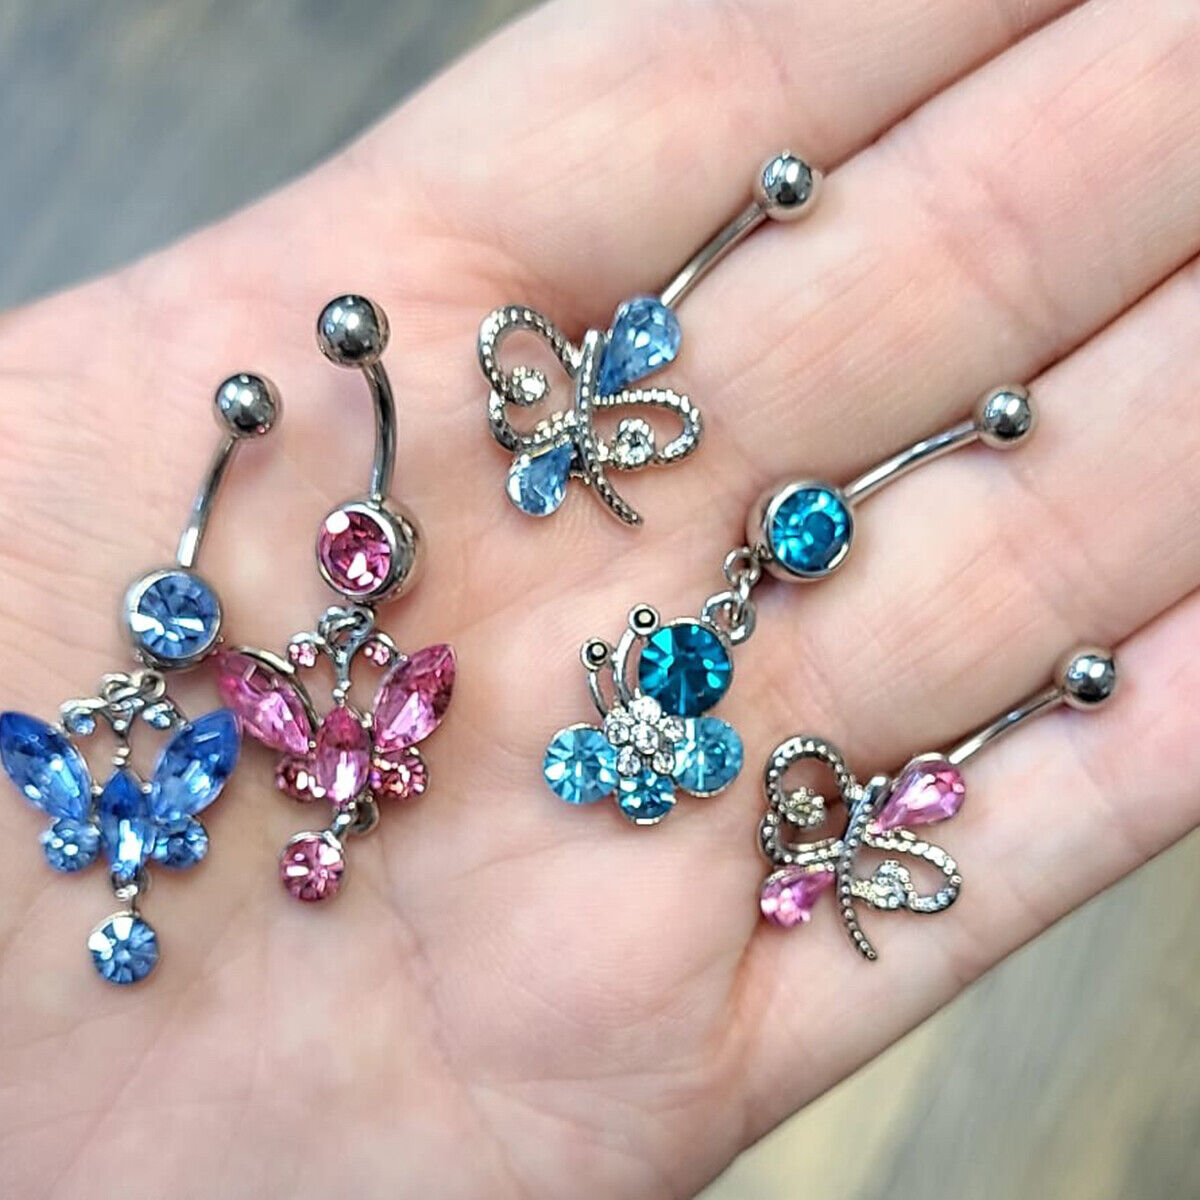 5 Pack of Fancy CZ Gem Belly Navel Ring Butterfly Design 14g Surgical Steel